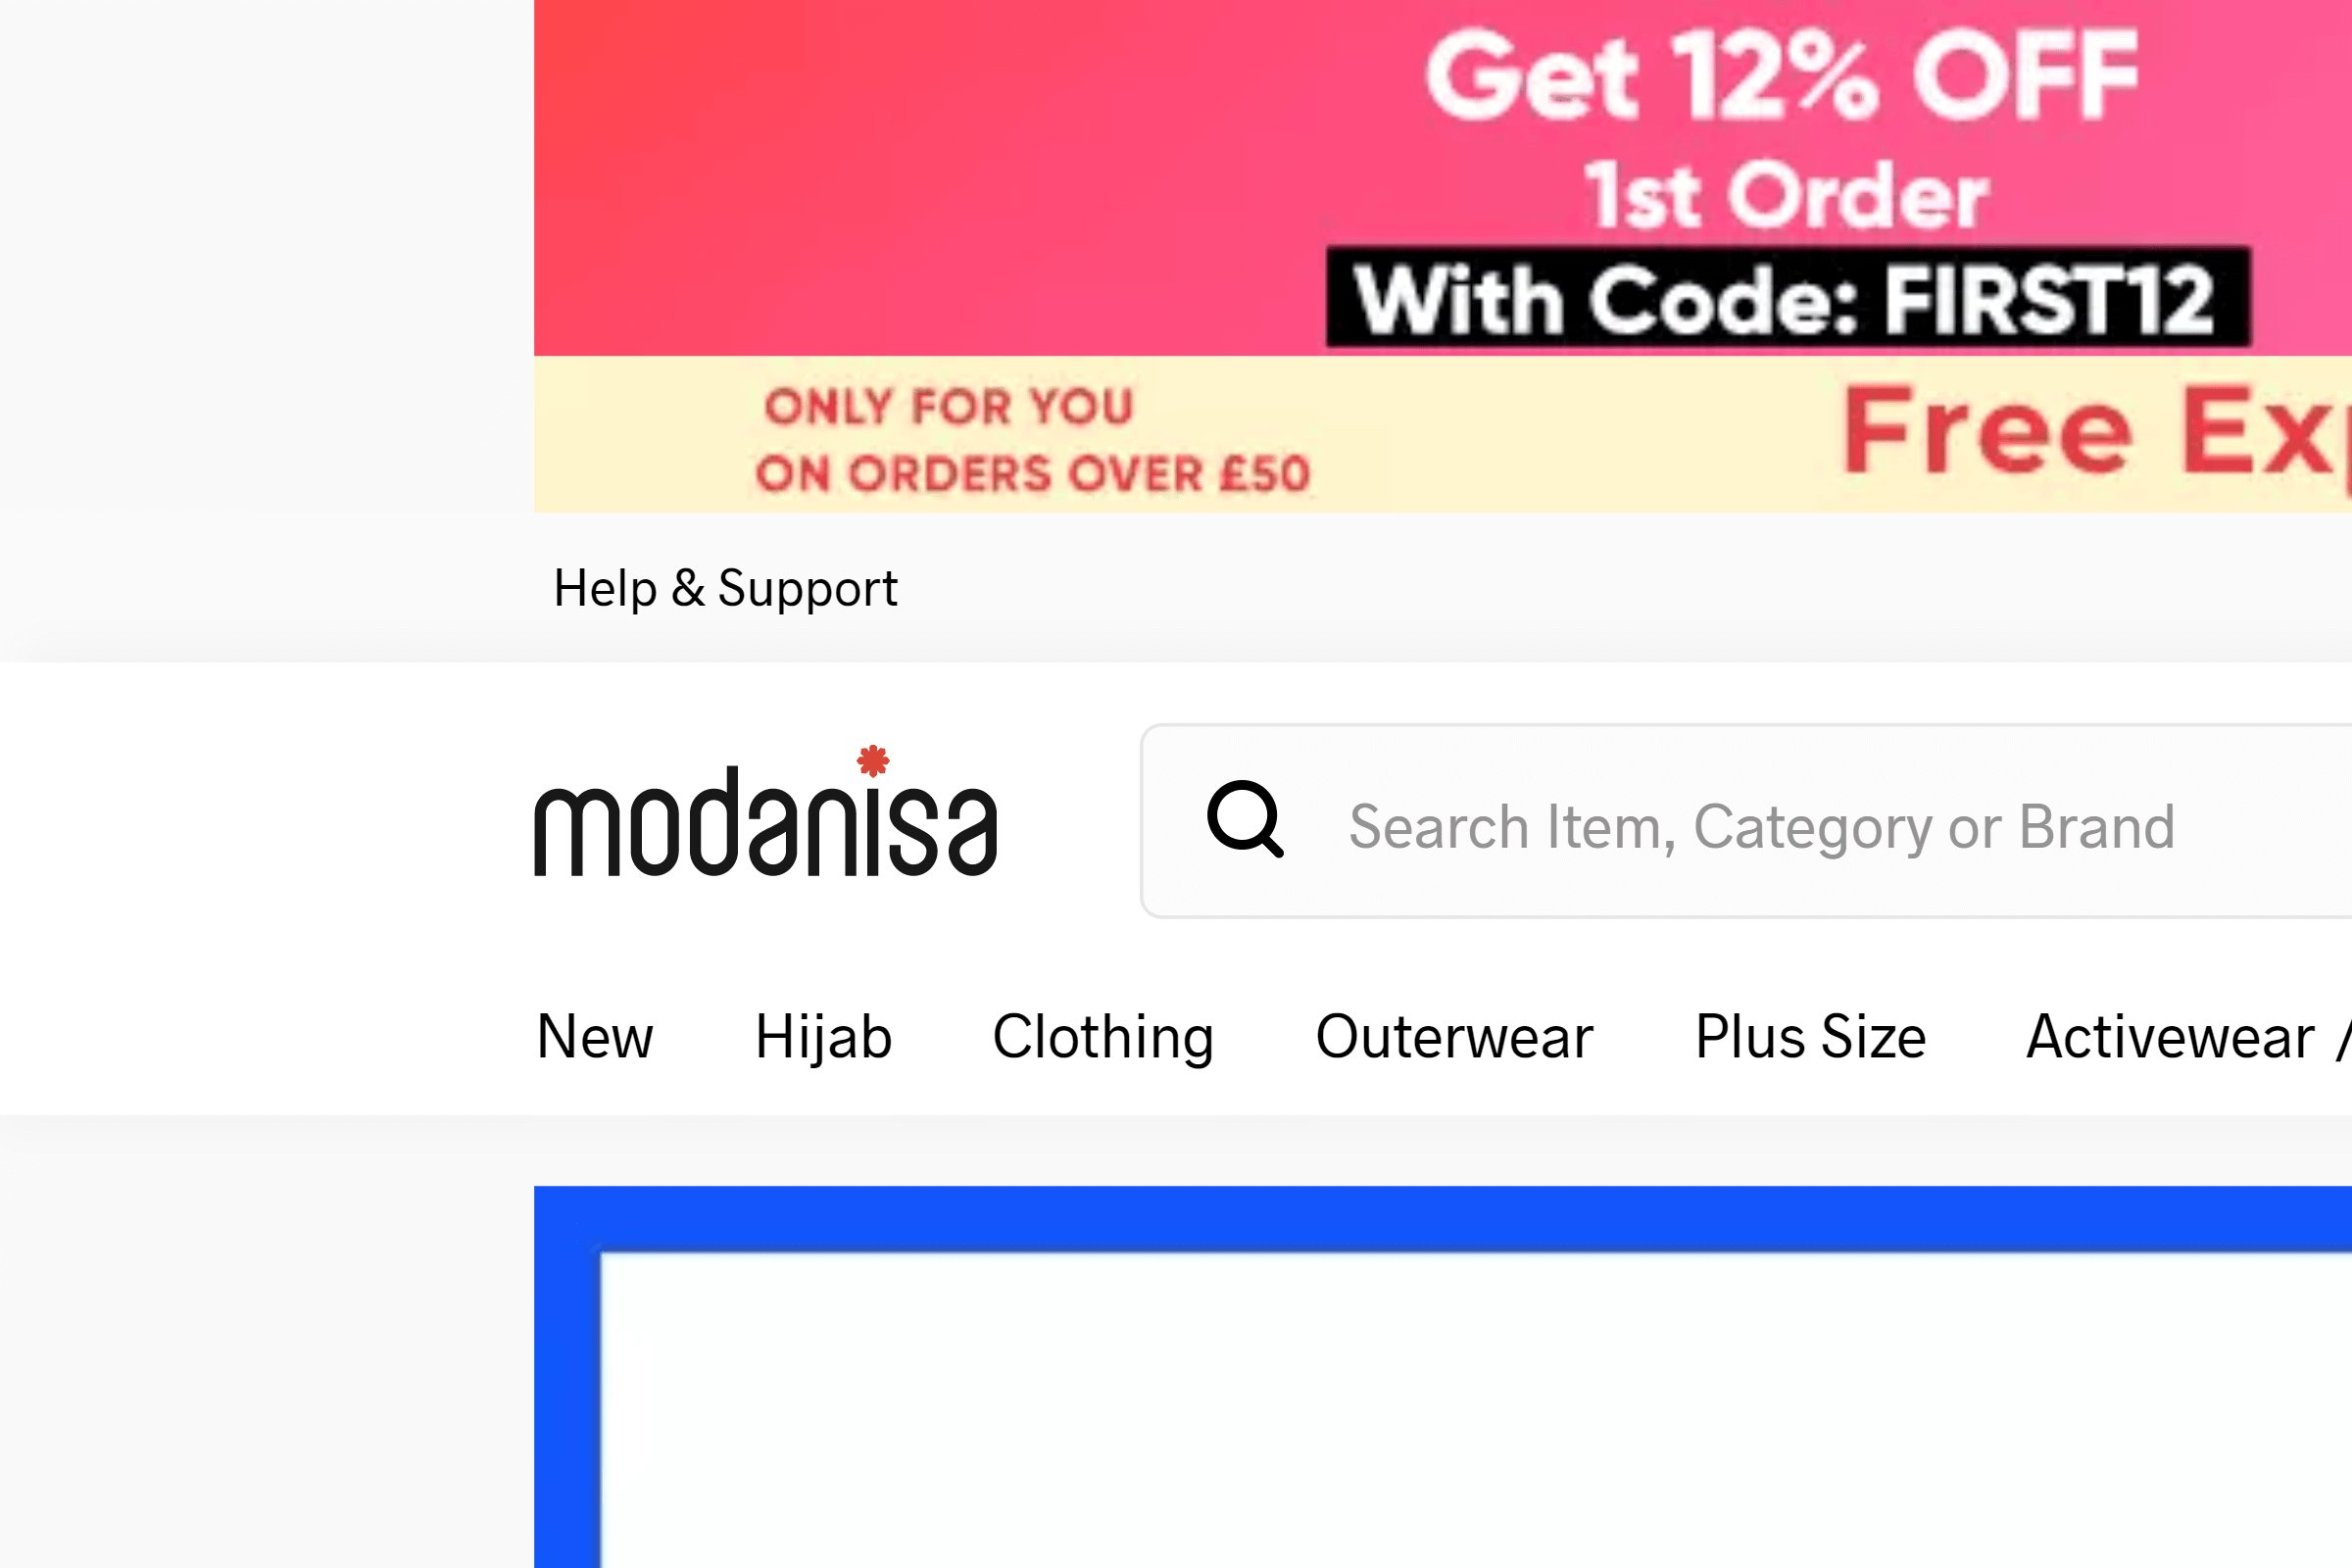 Modanisa on ReadSomeReviews